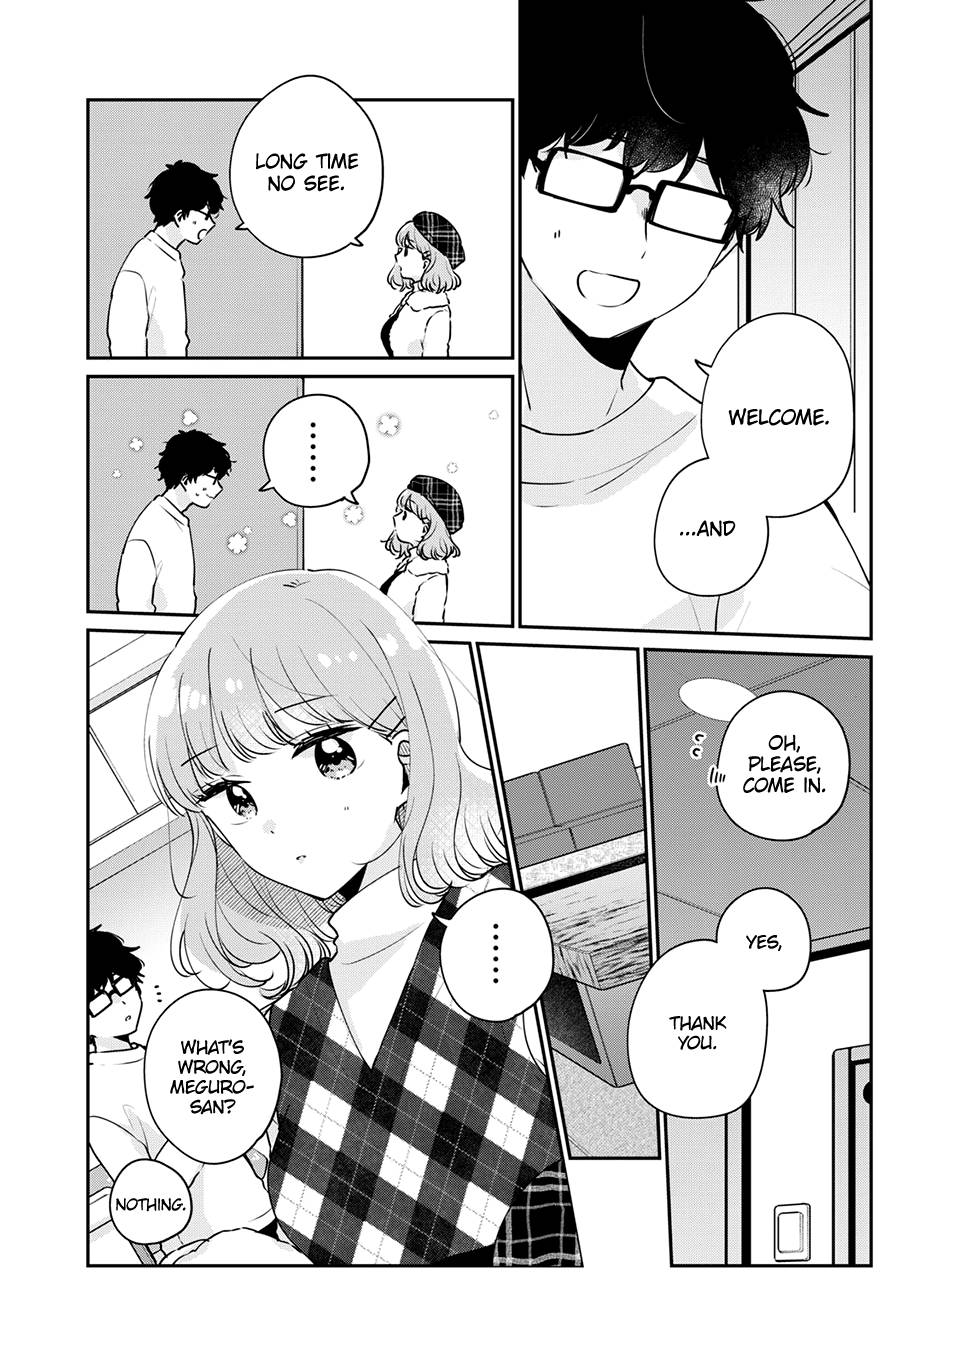 It's Not Meguro-san's First Time chapter 43 page 8